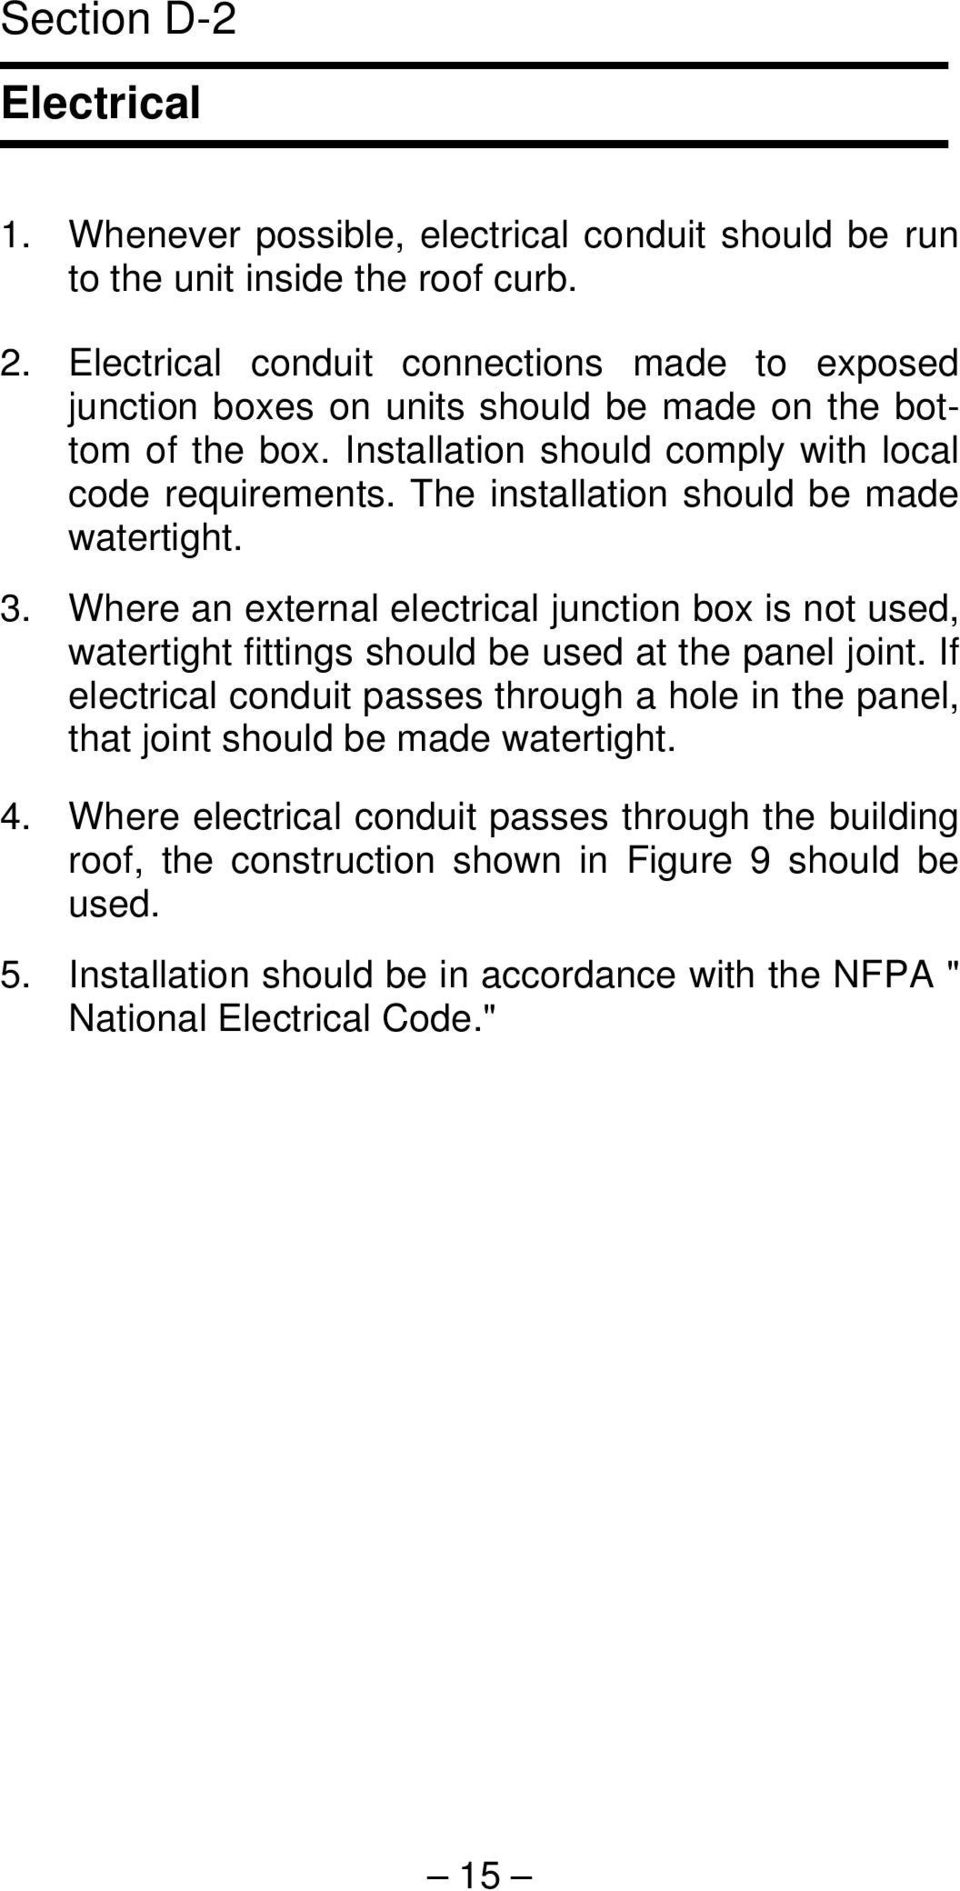 The installation should be made watertight. 3. Where an external electrical junction box is not used, watertight fittings should be used at the panel joint.